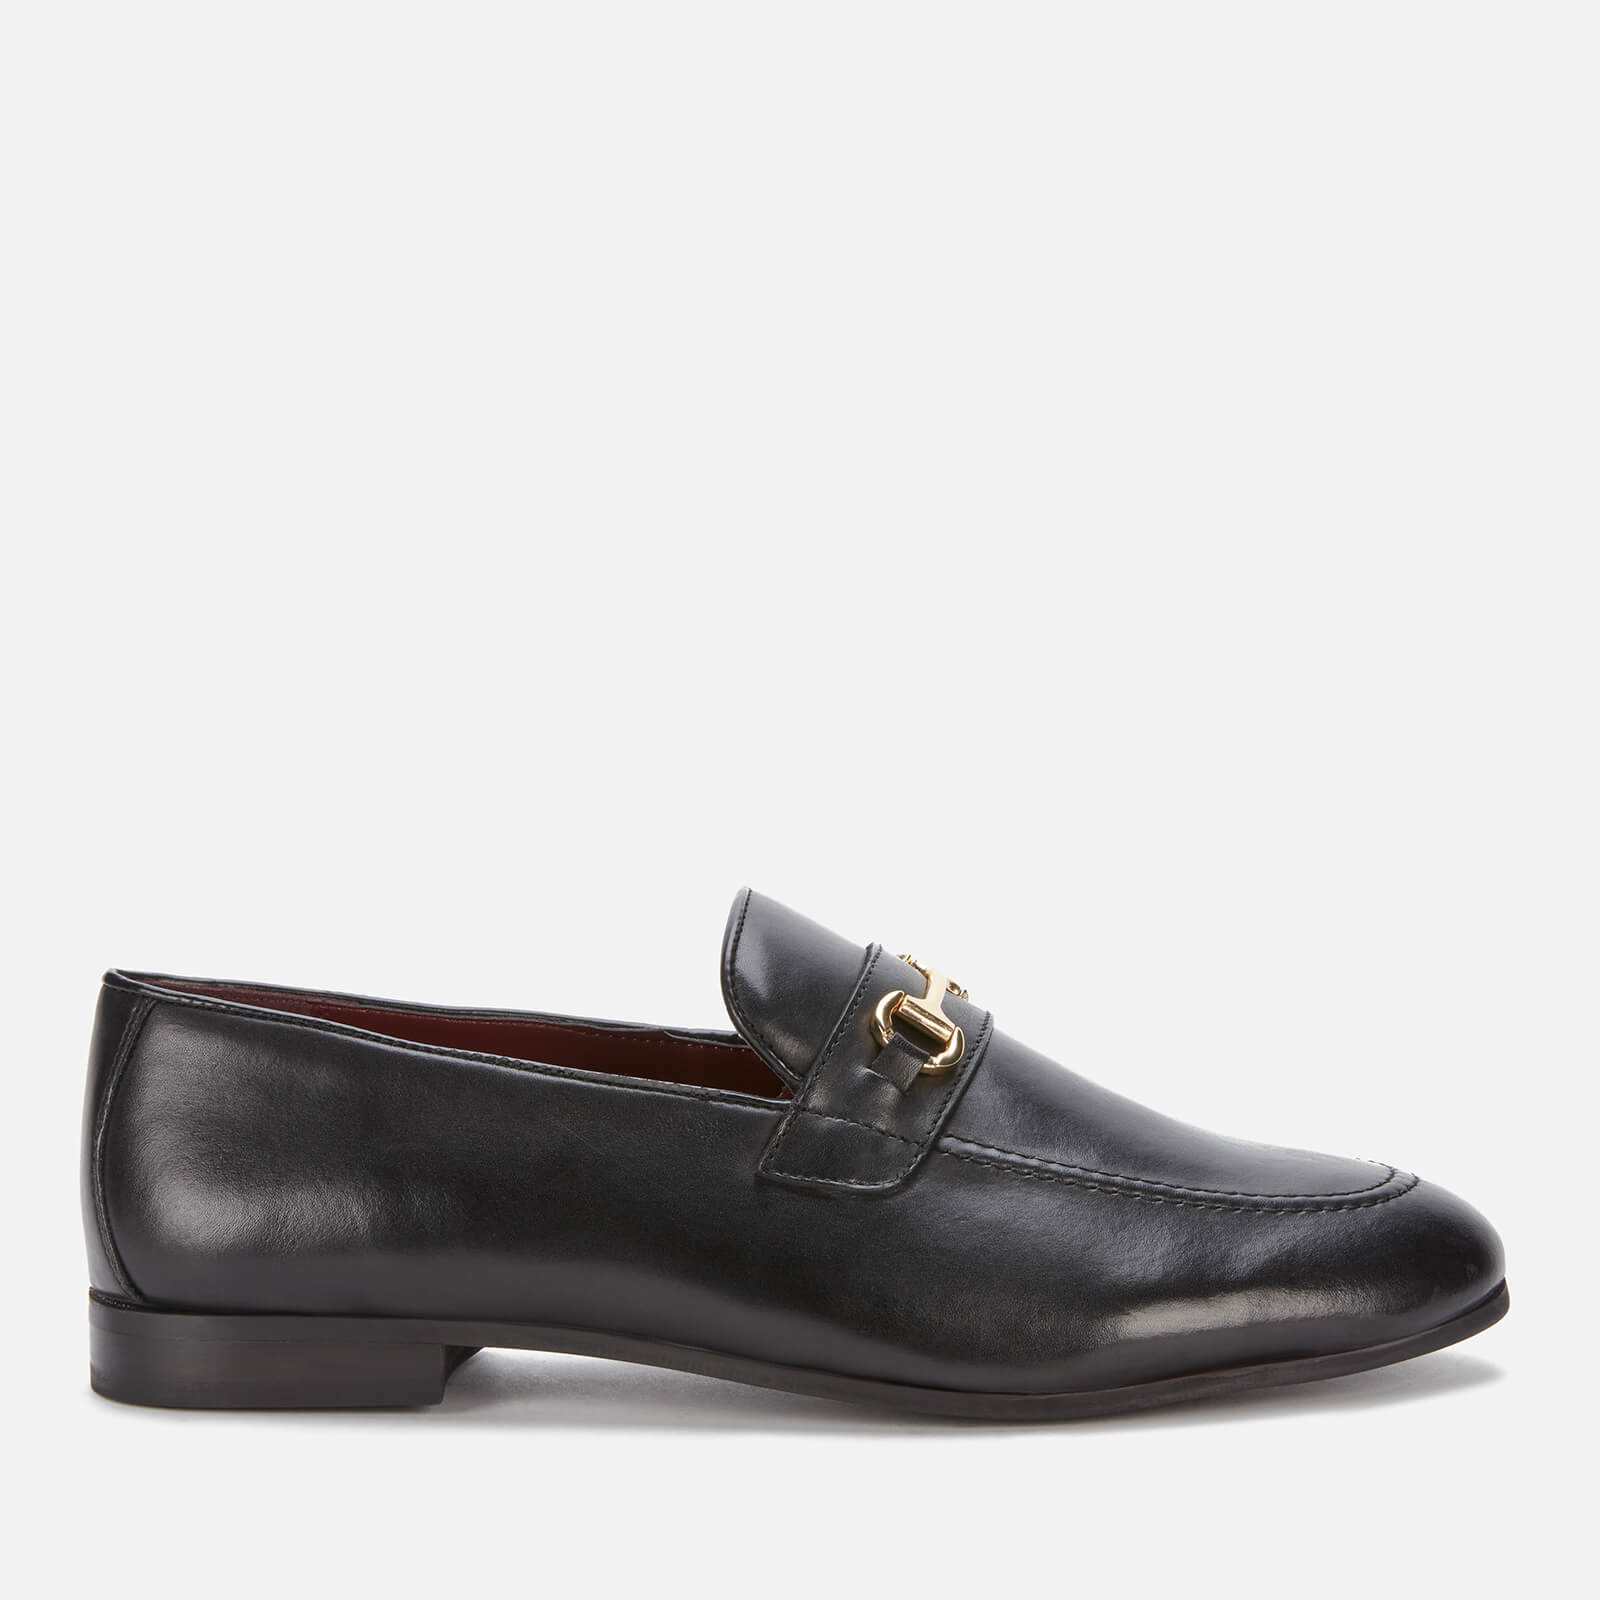 Walk London Men’s Terry Trim Leather Loafers - Black